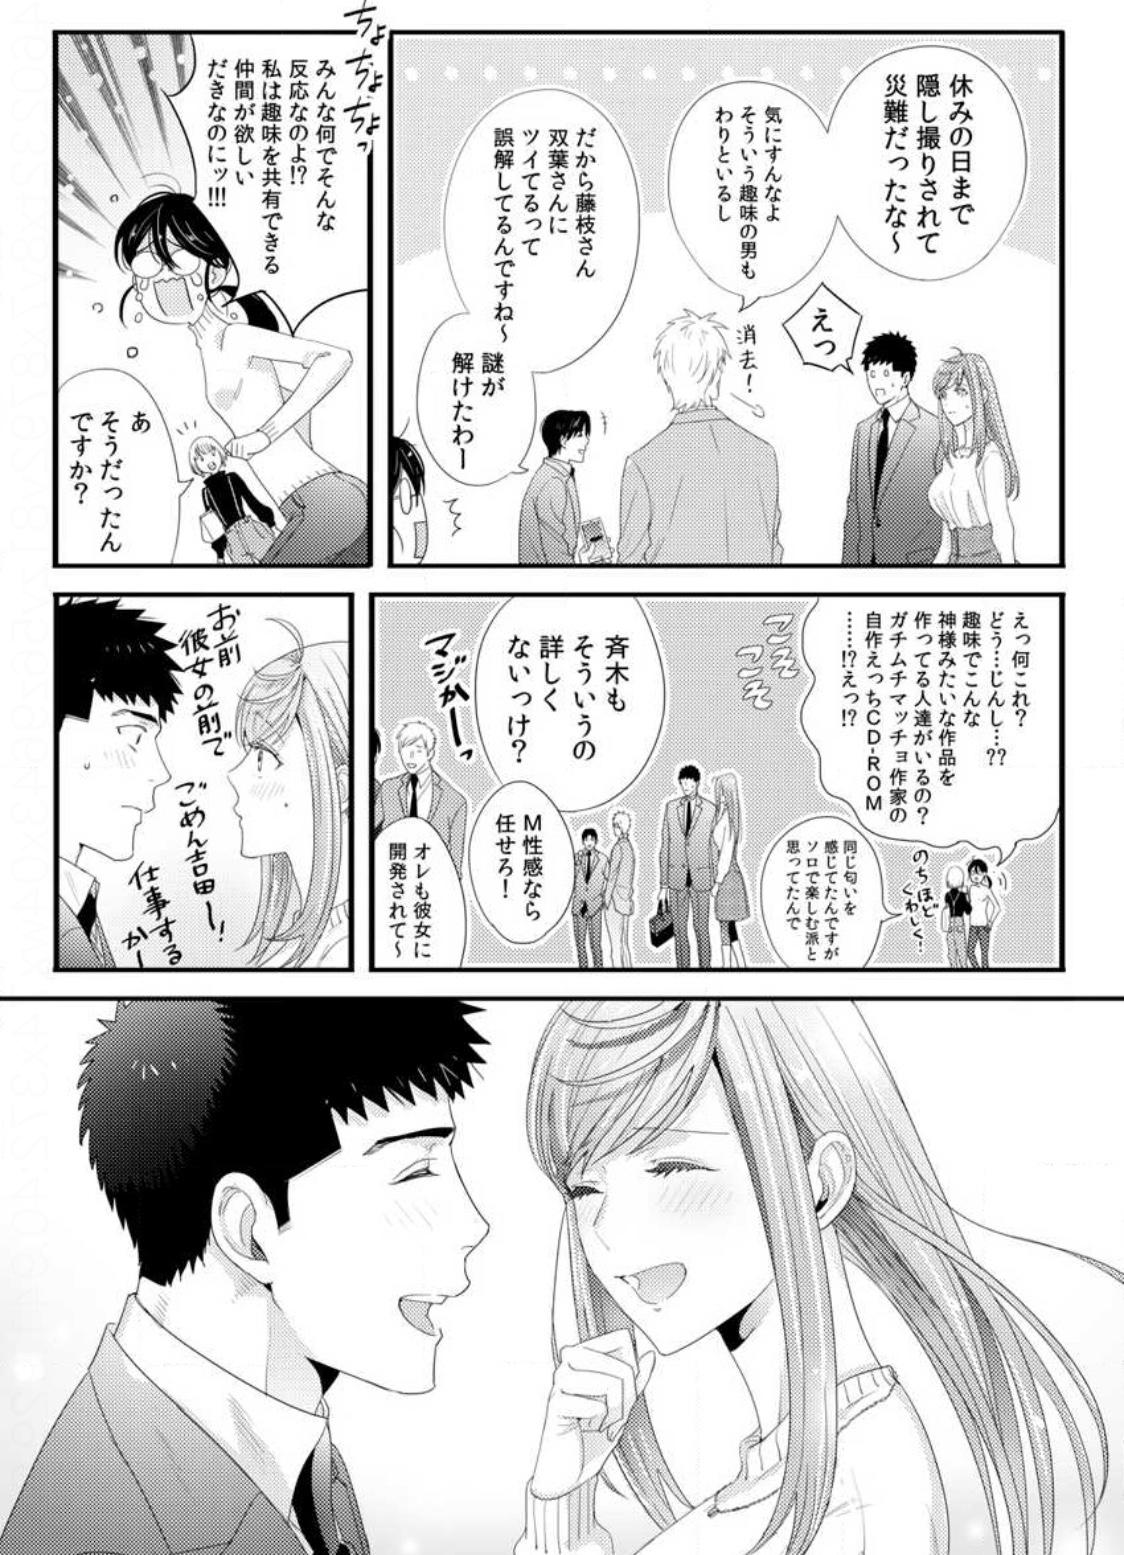 Please Let Me Hold You Futaba-San! Ch. 1-4 102